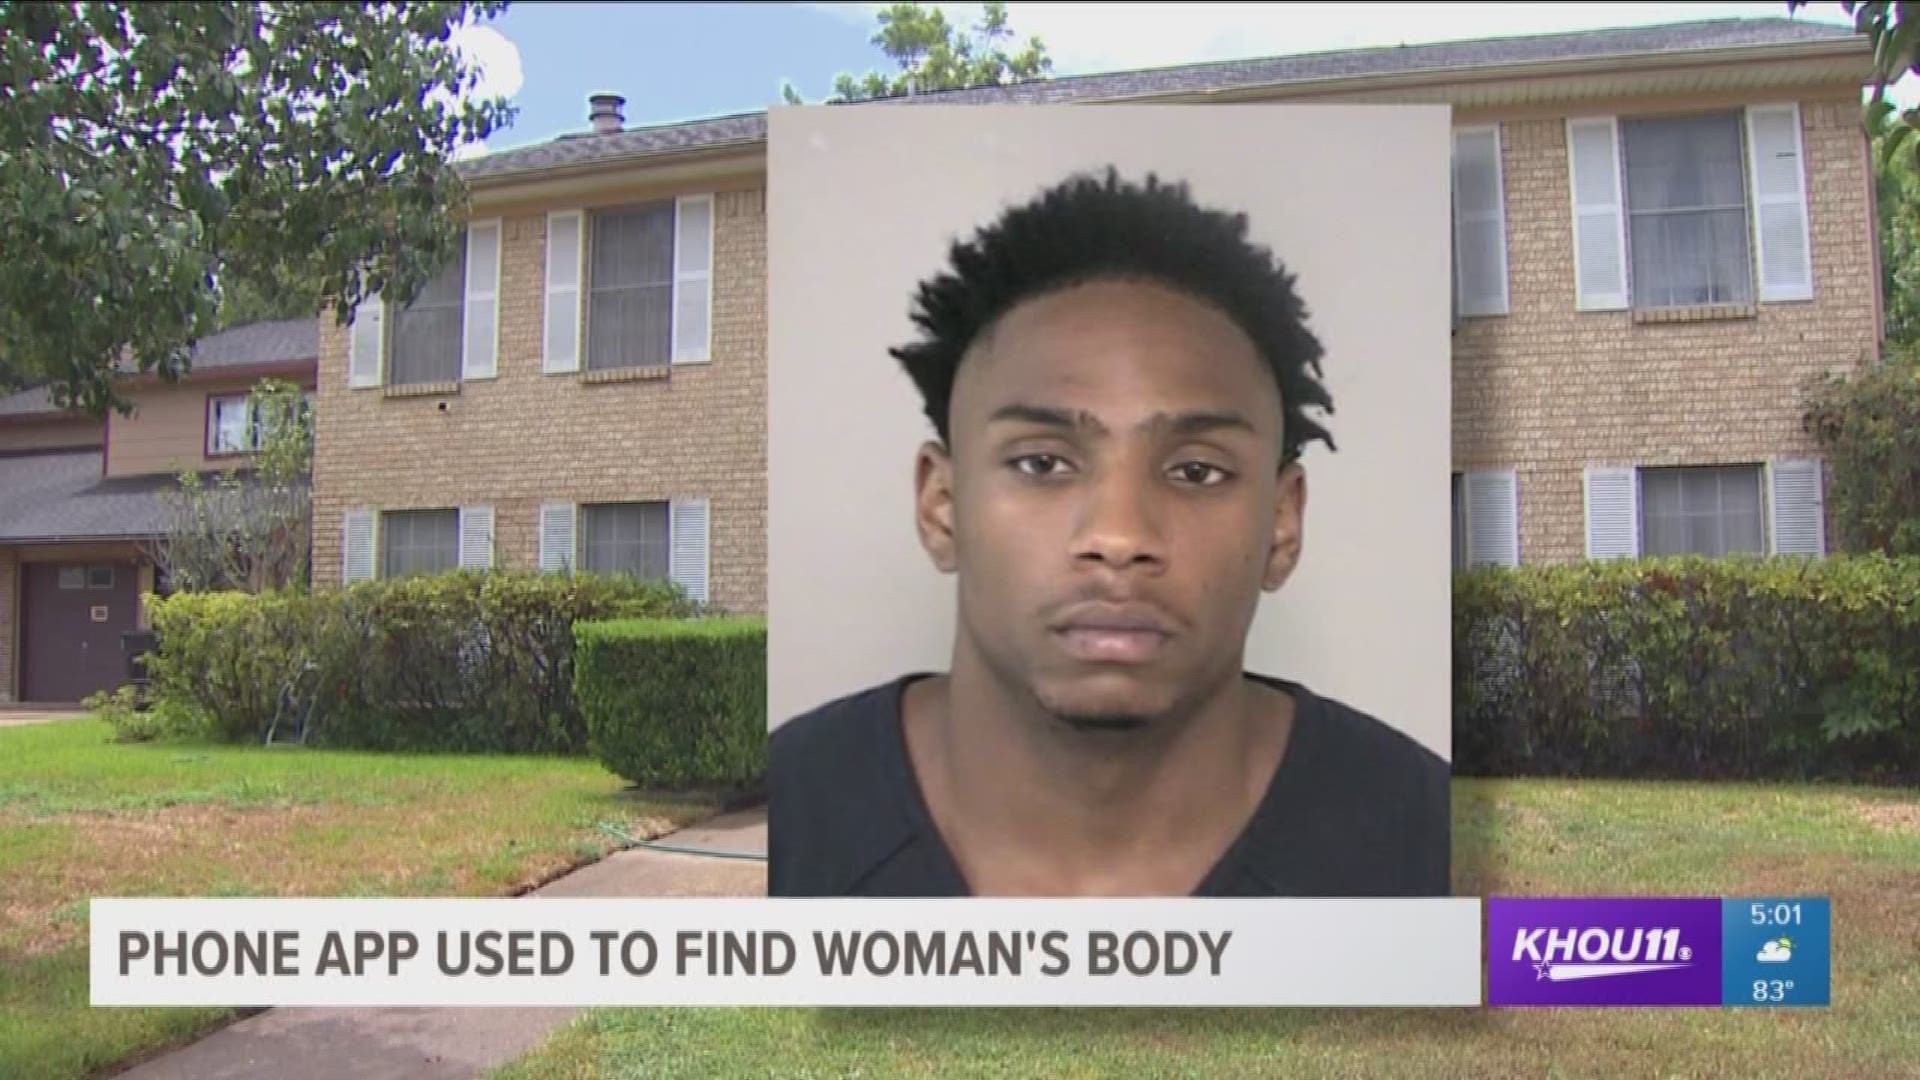 Missouri City Police say a woman was strangled by her boyfriend and her body was found in the trunk of her car after family members used a phone app to find the vehicle.